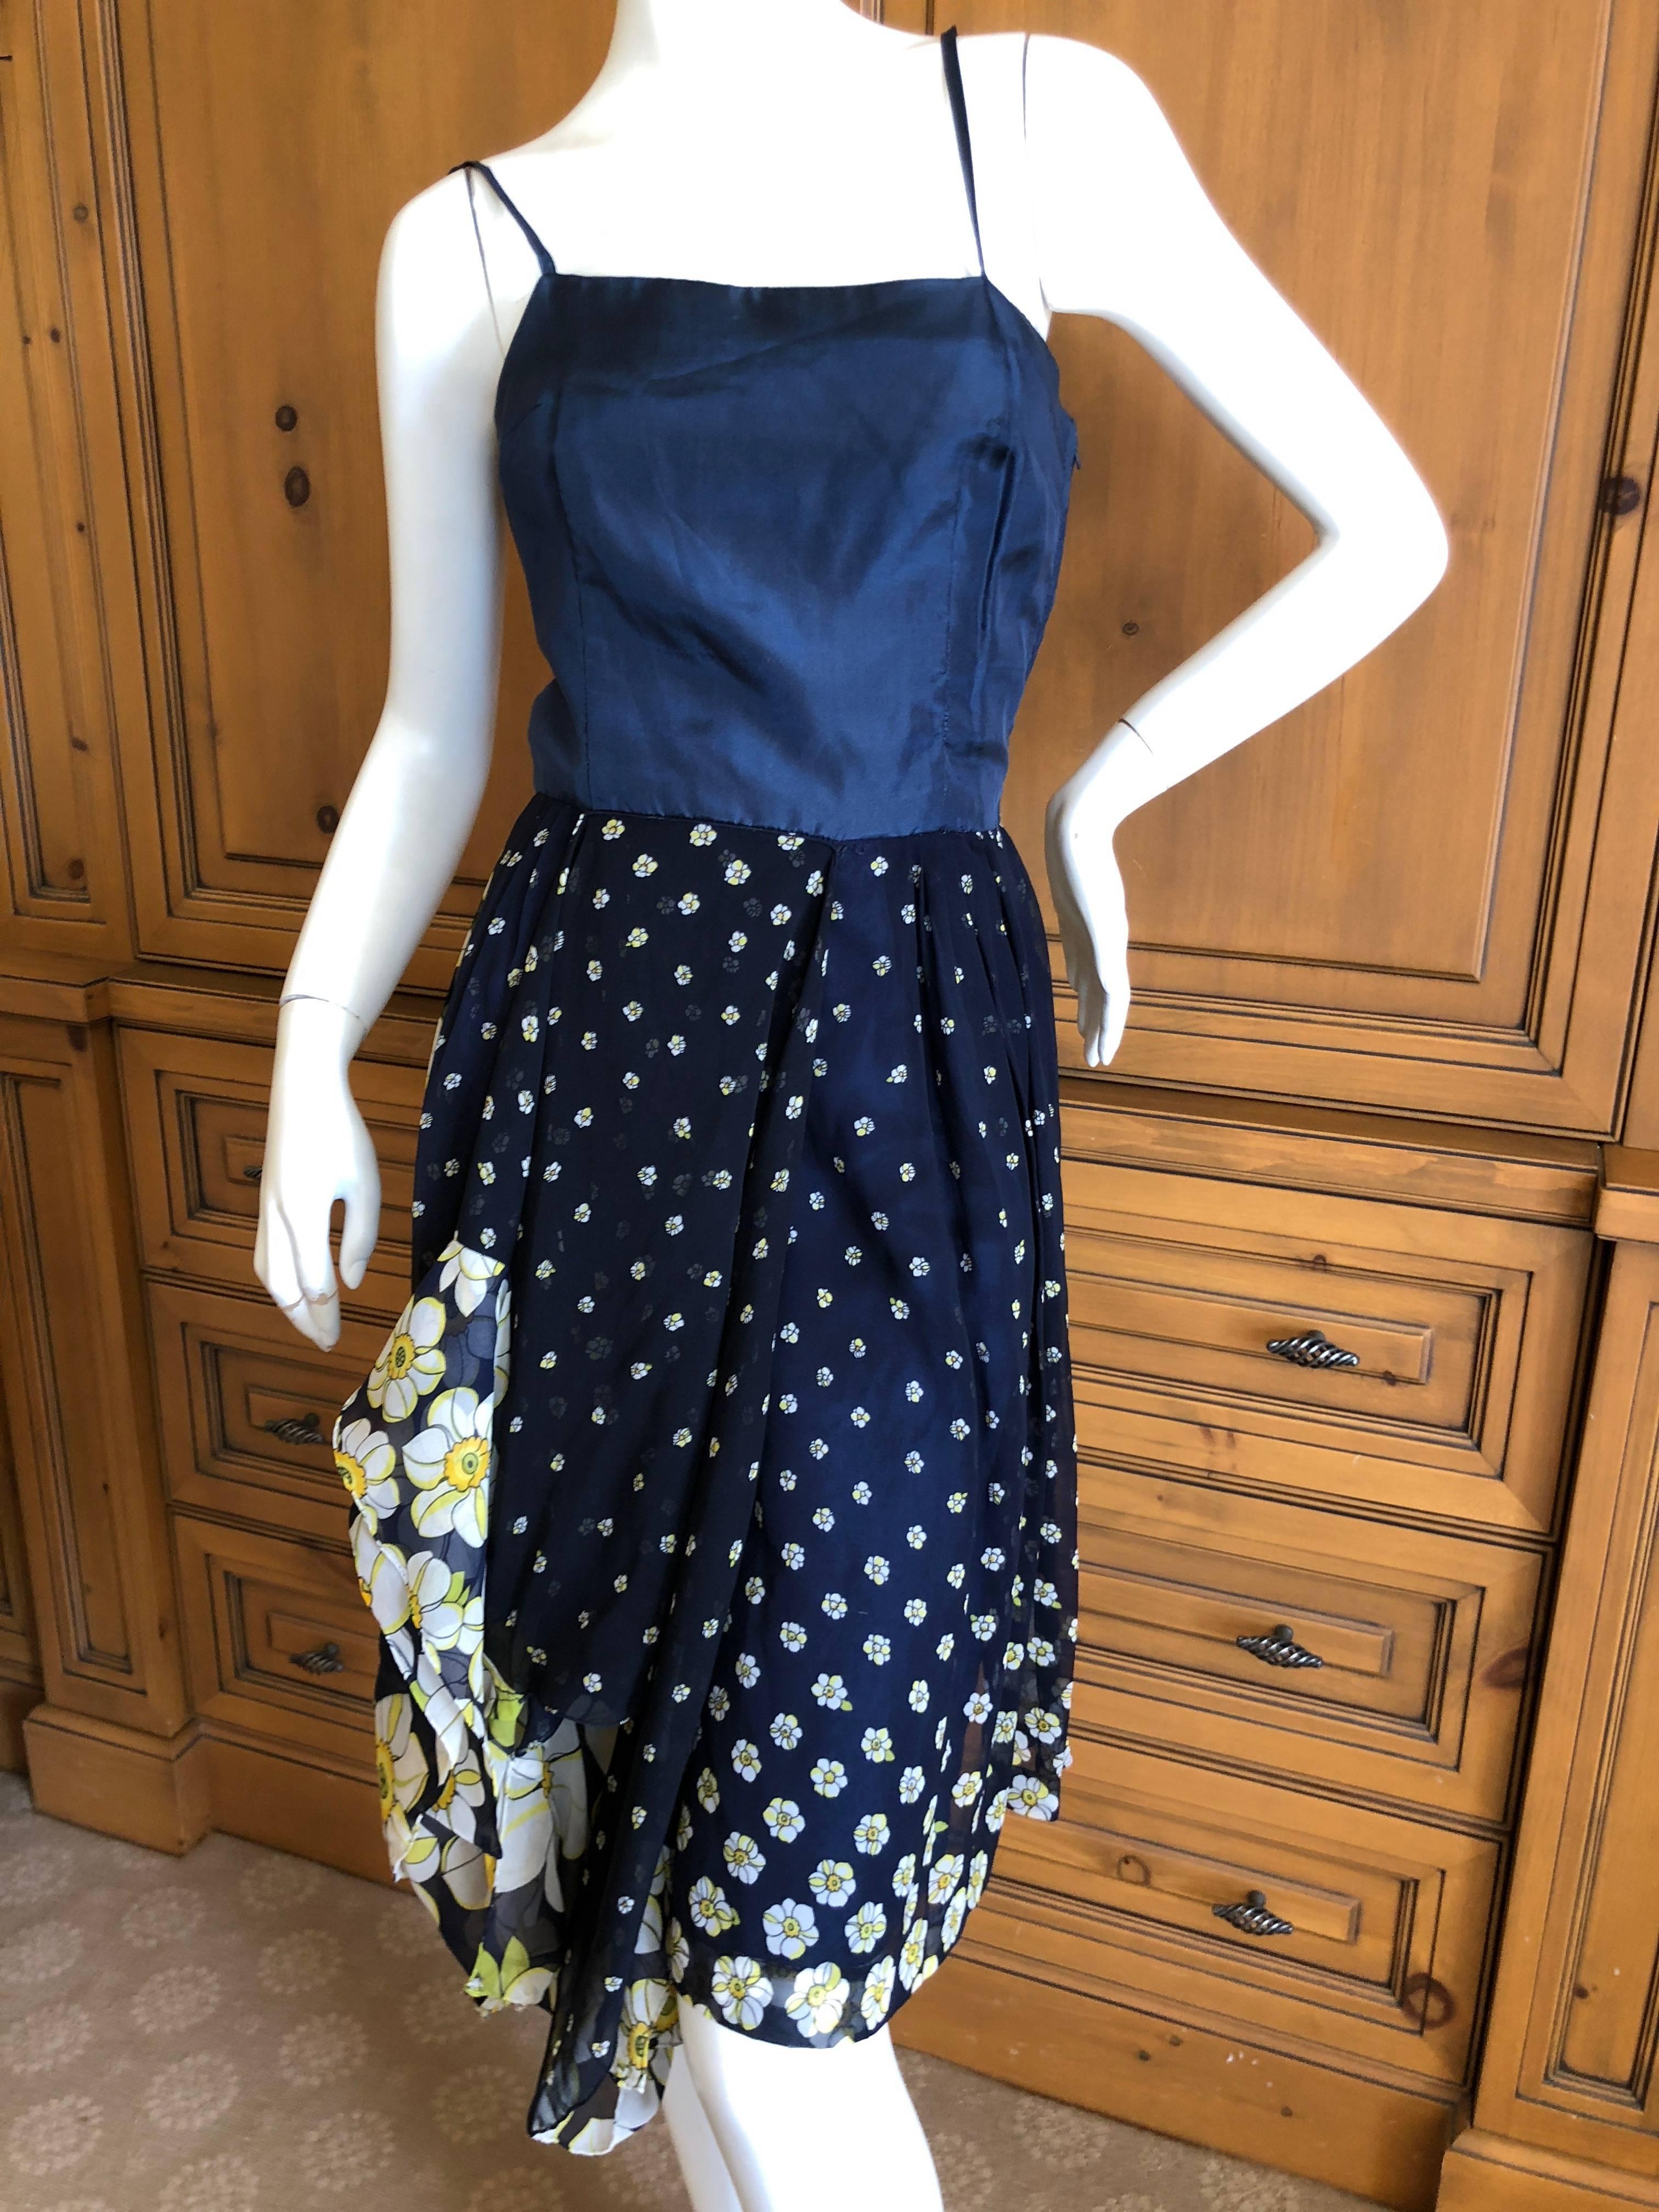 Cardinali Multi Pattern Silk Day Dress In Excellent Condition For Sale In Cloverdale, CA